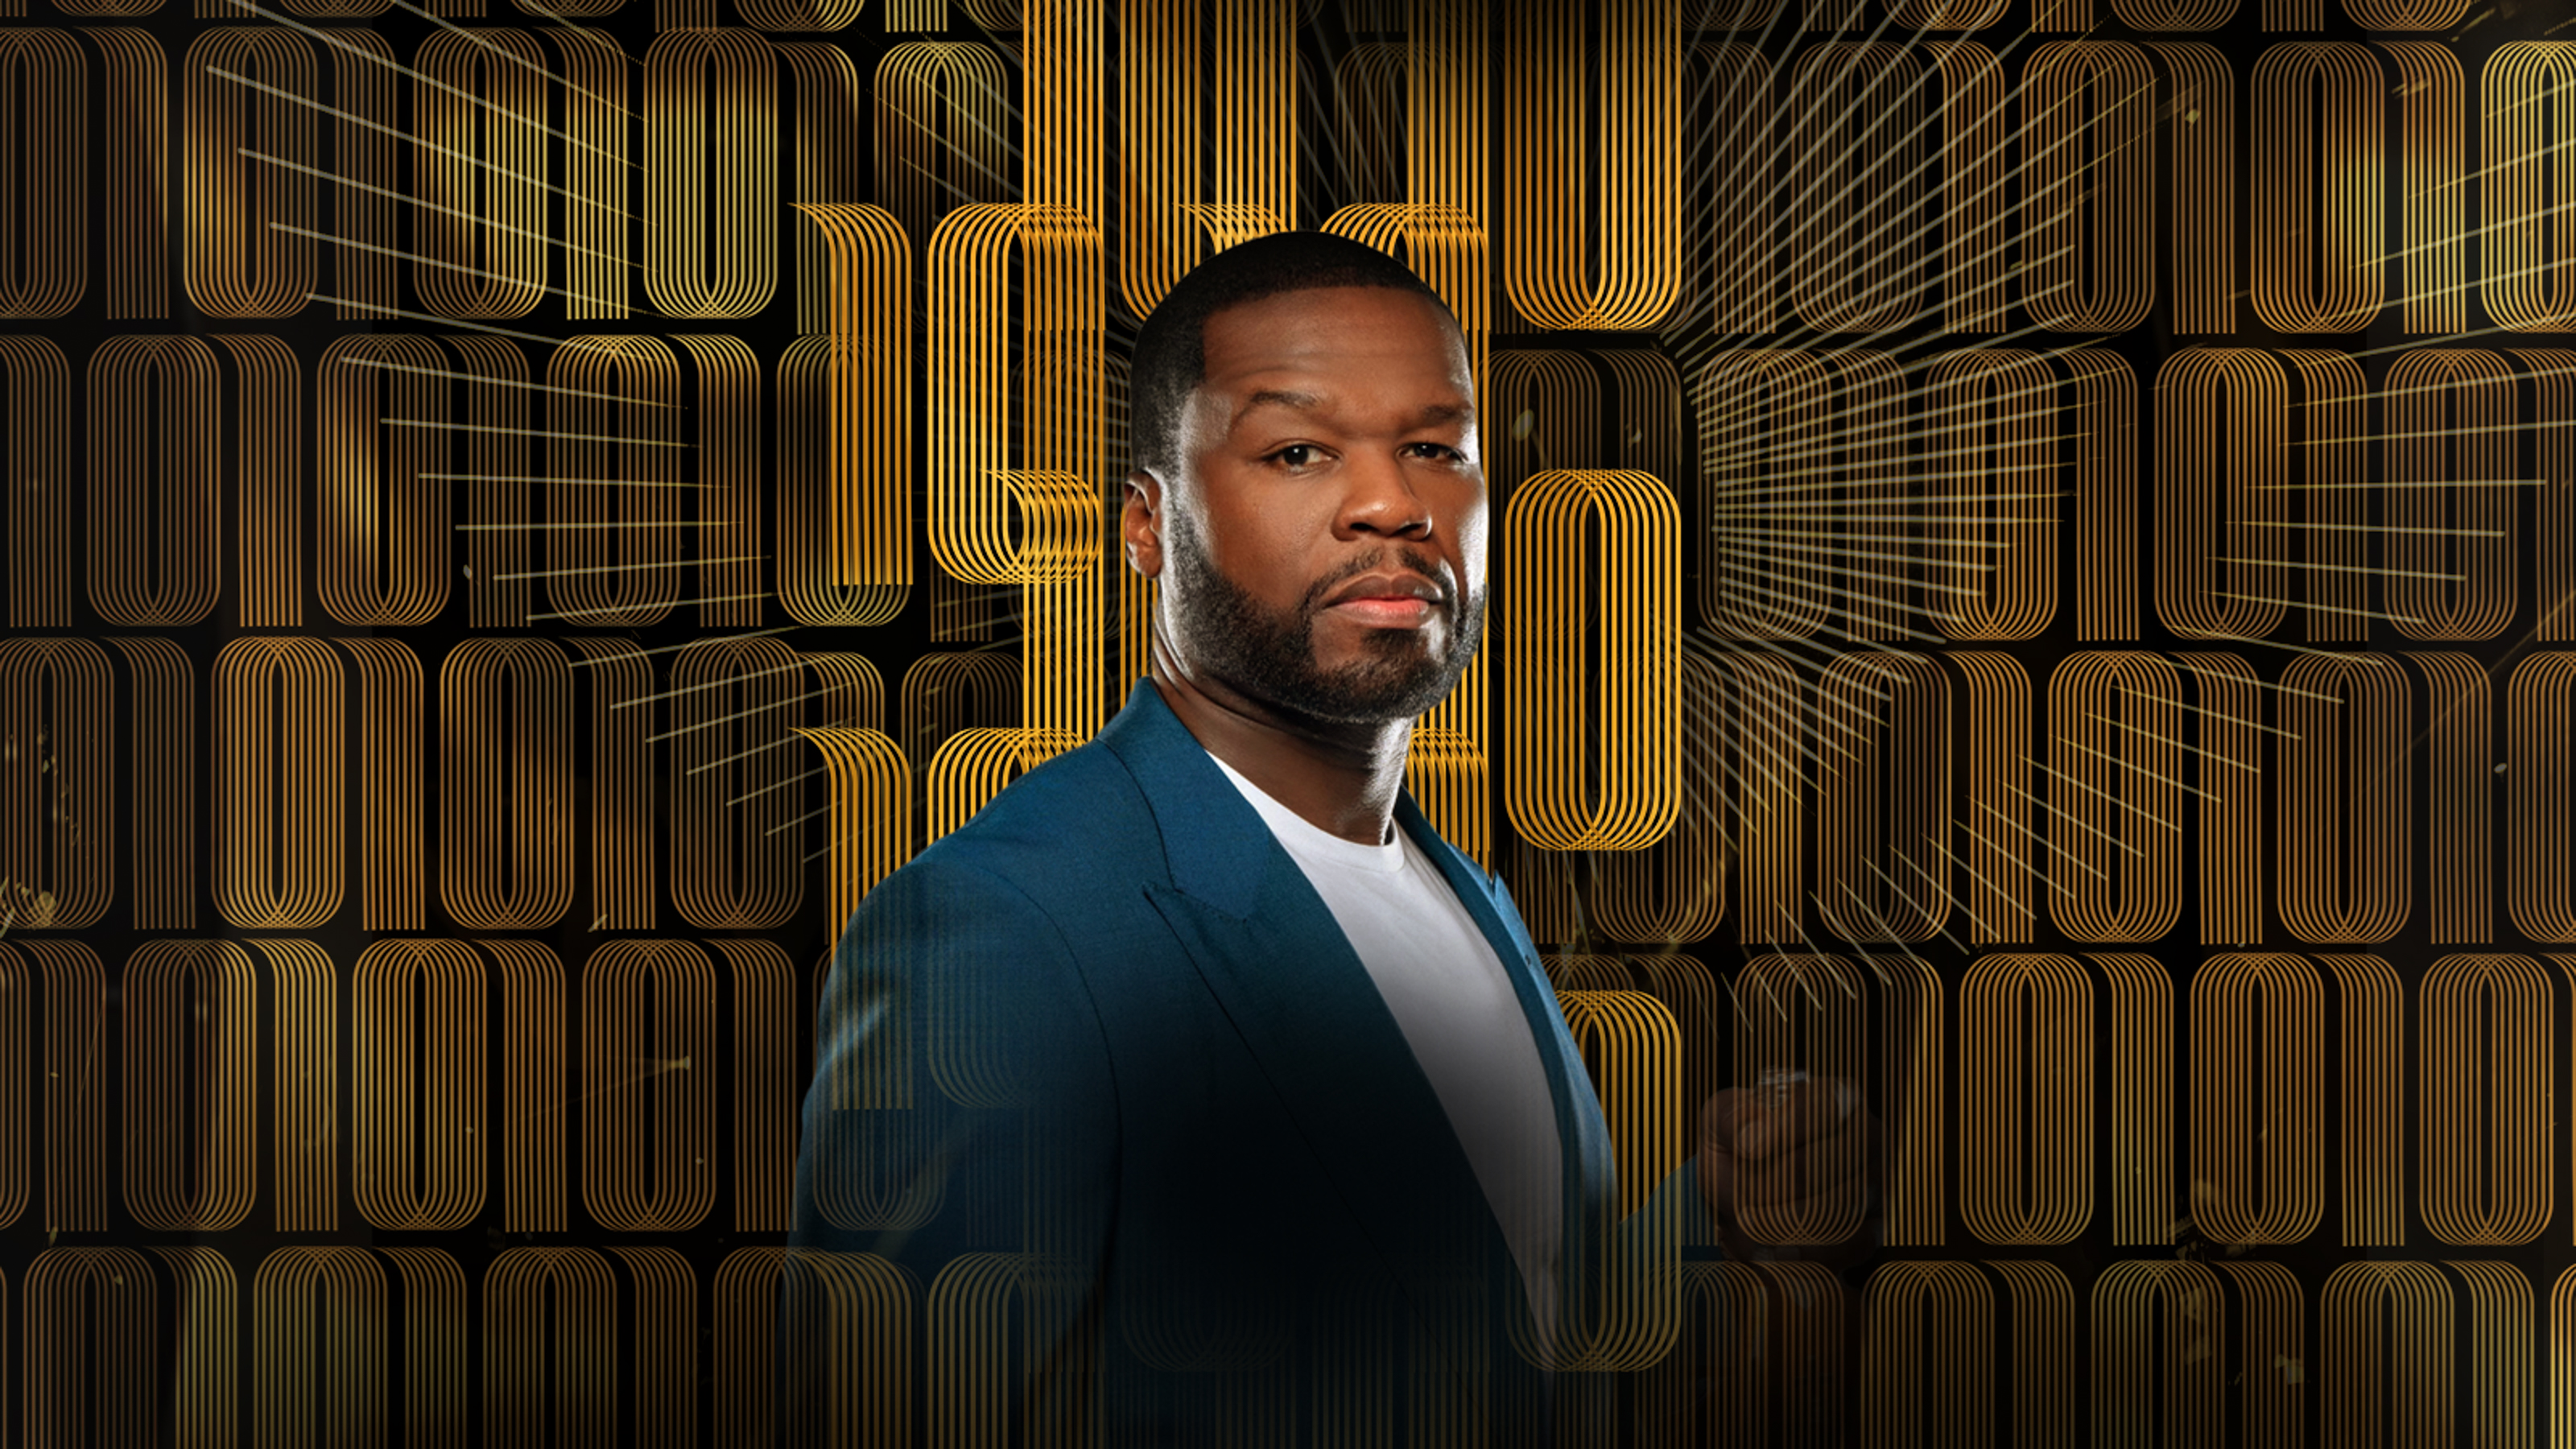 50 Cent tour: Rapper on 2023 concerts, Drake and being upside down